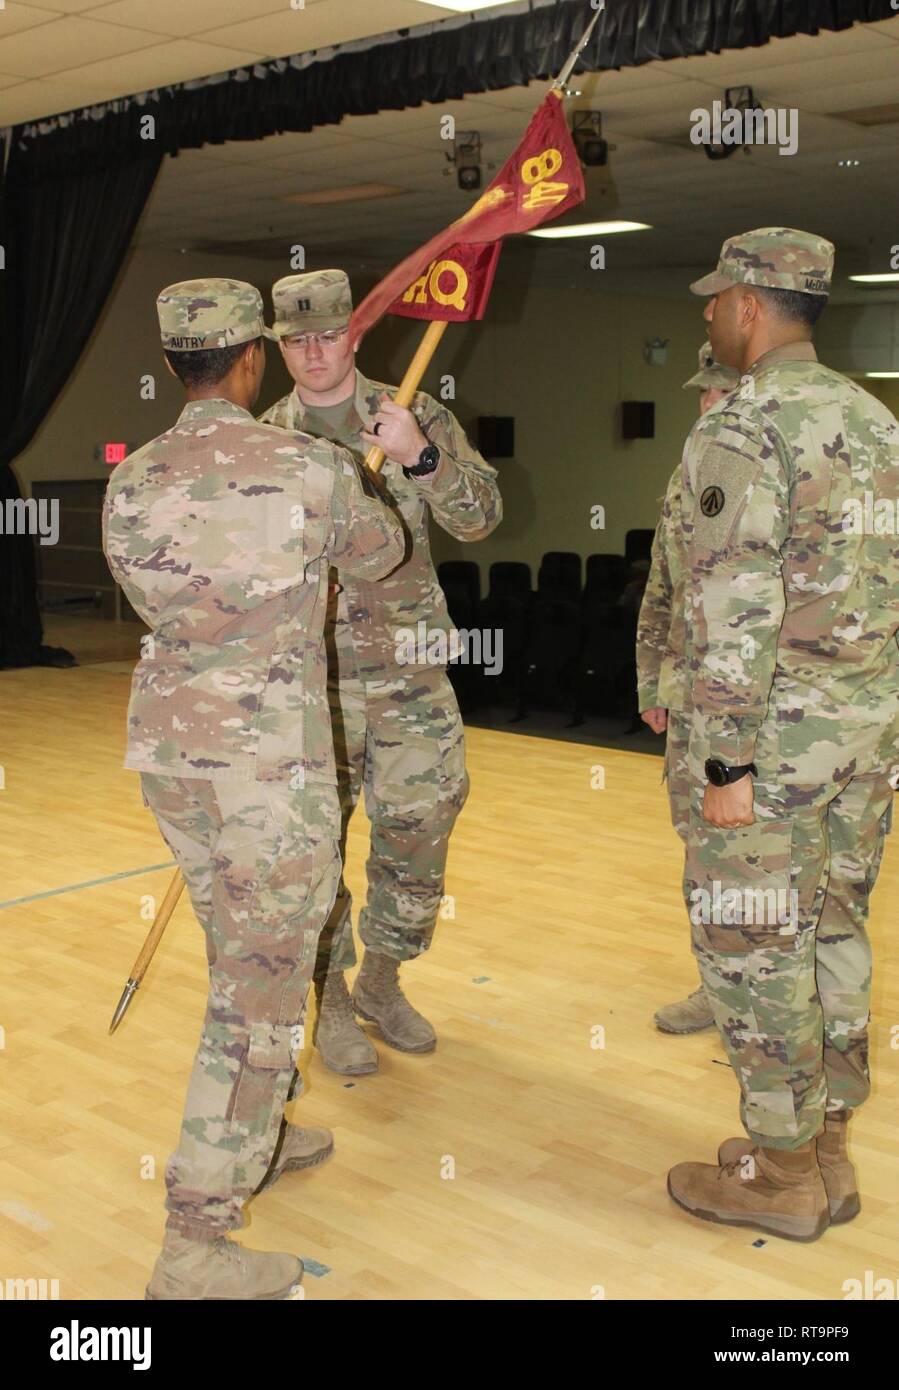 Capt. Willard C. Lewman receives the guidon from Sgt. 1st Class Stacy C. Autry during a change of command ceremony for Headquarters & Headquarters Detachment, 840th Transportation Battalion, at Camp Arifjan, Kuwait, Jan. 31, 2019. Stock Photo